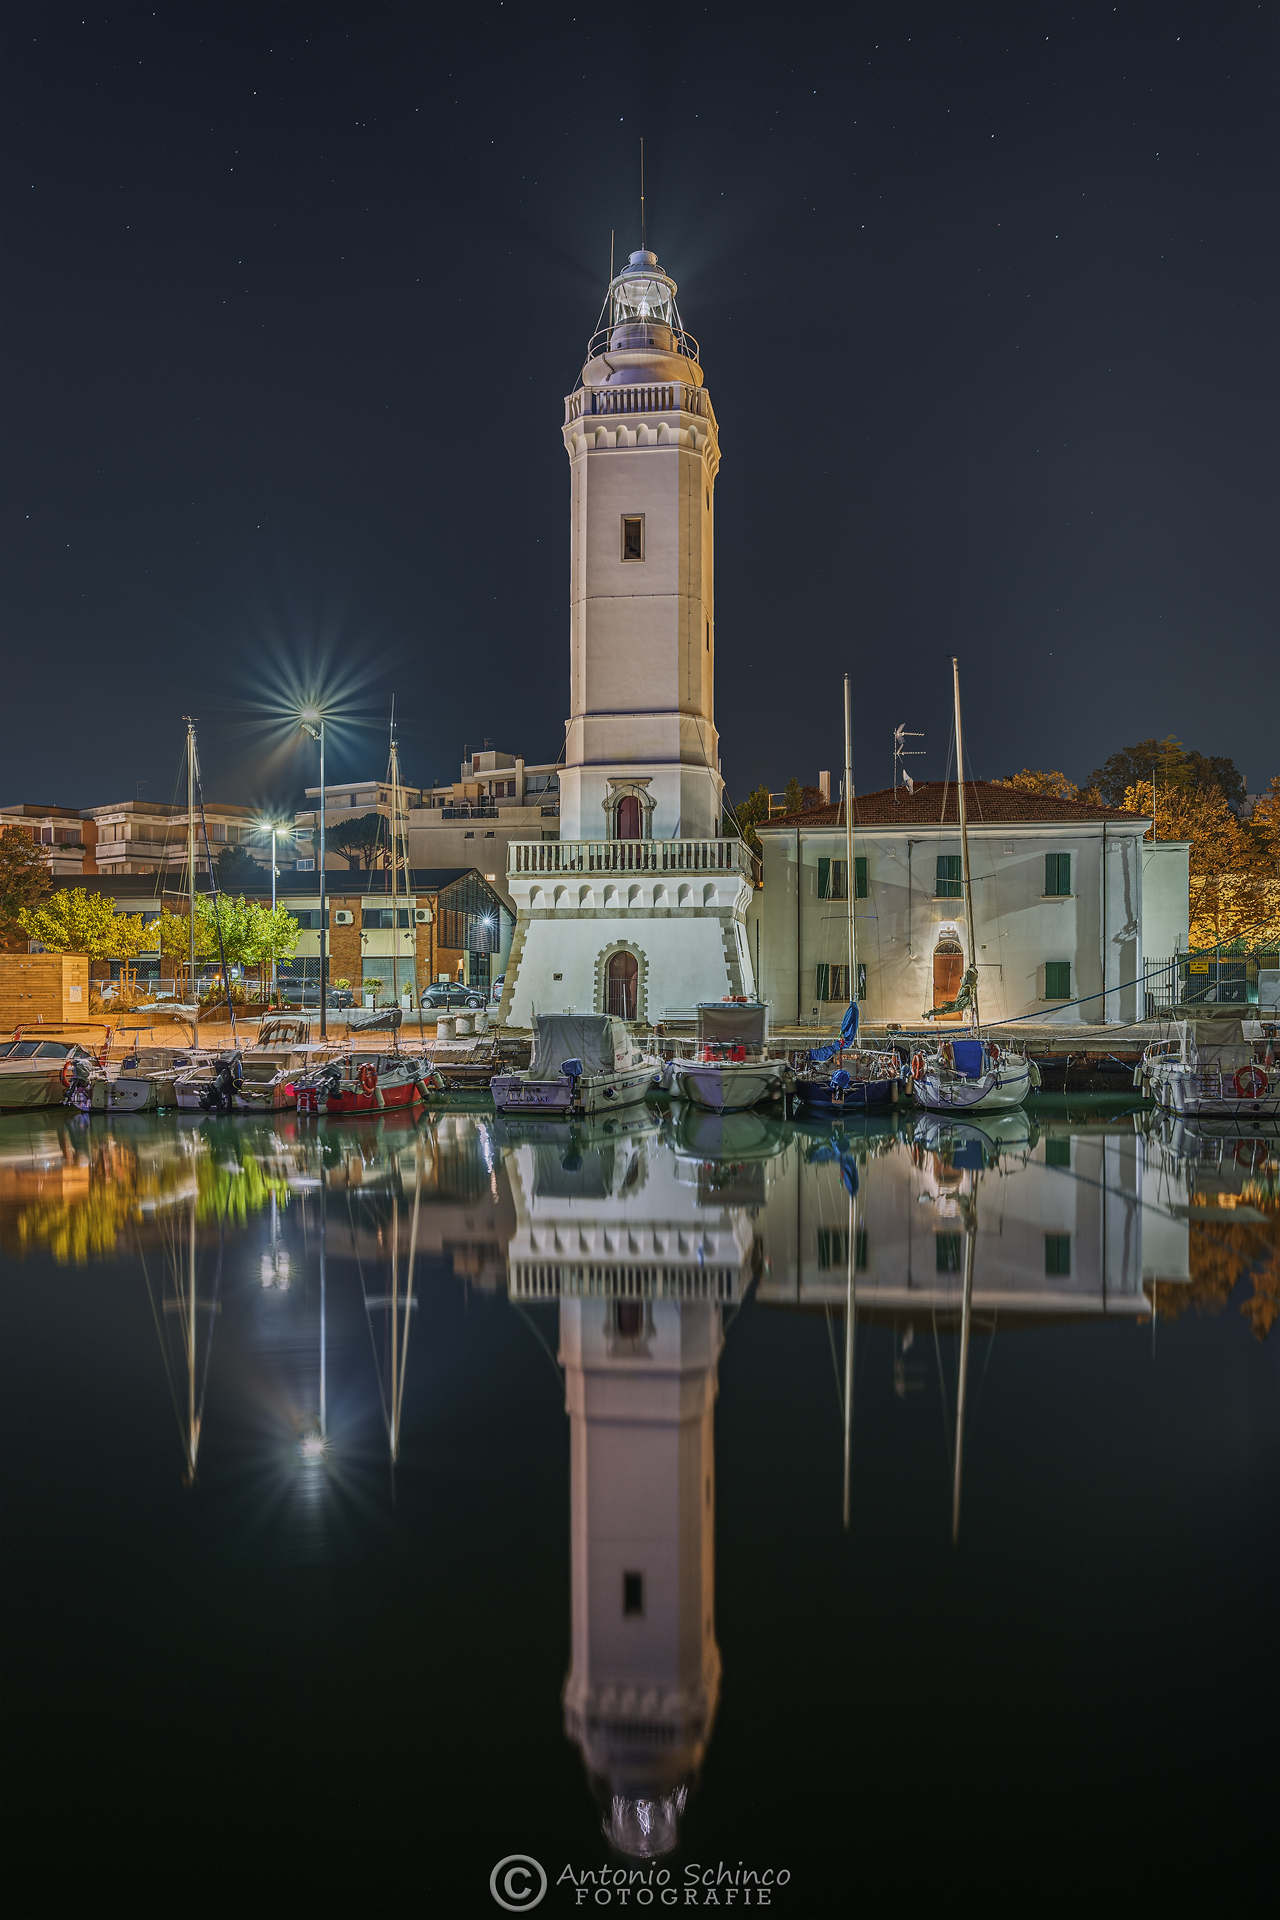 The lighthouse reflected in the waters of the Canal Port...